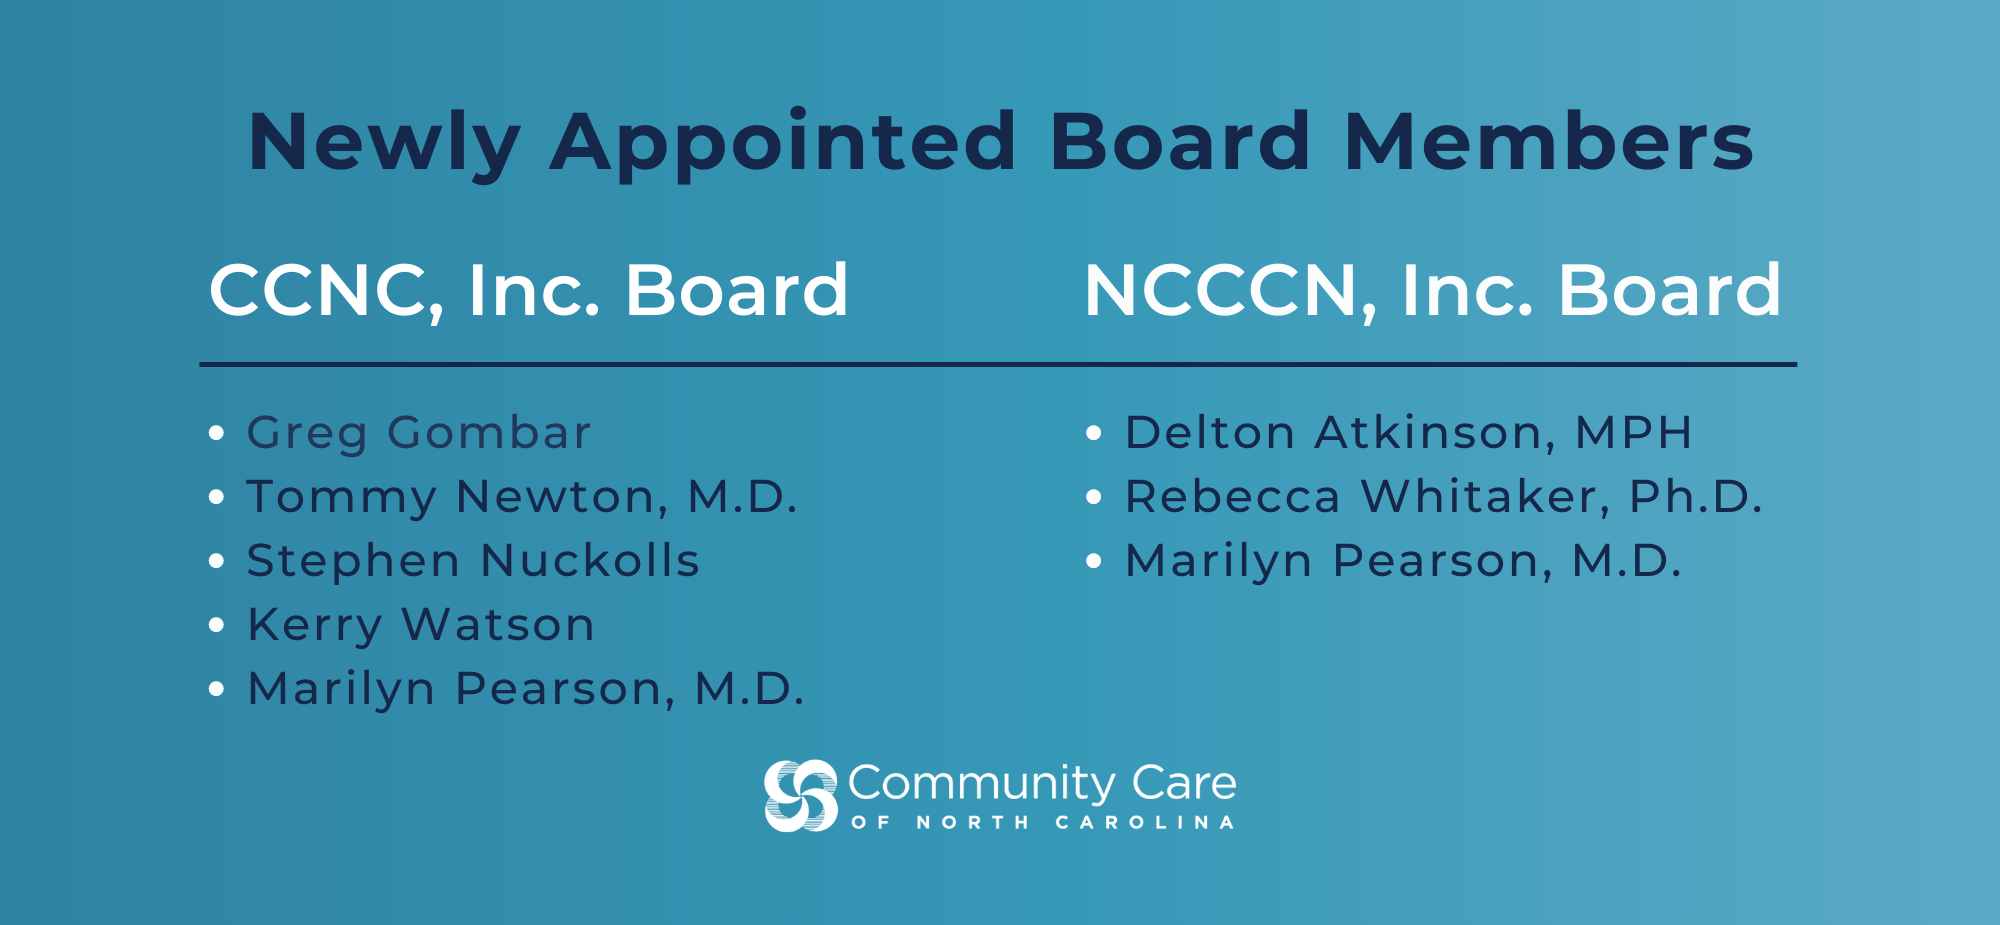 CCNC Announces New Appointments to Board of Directors